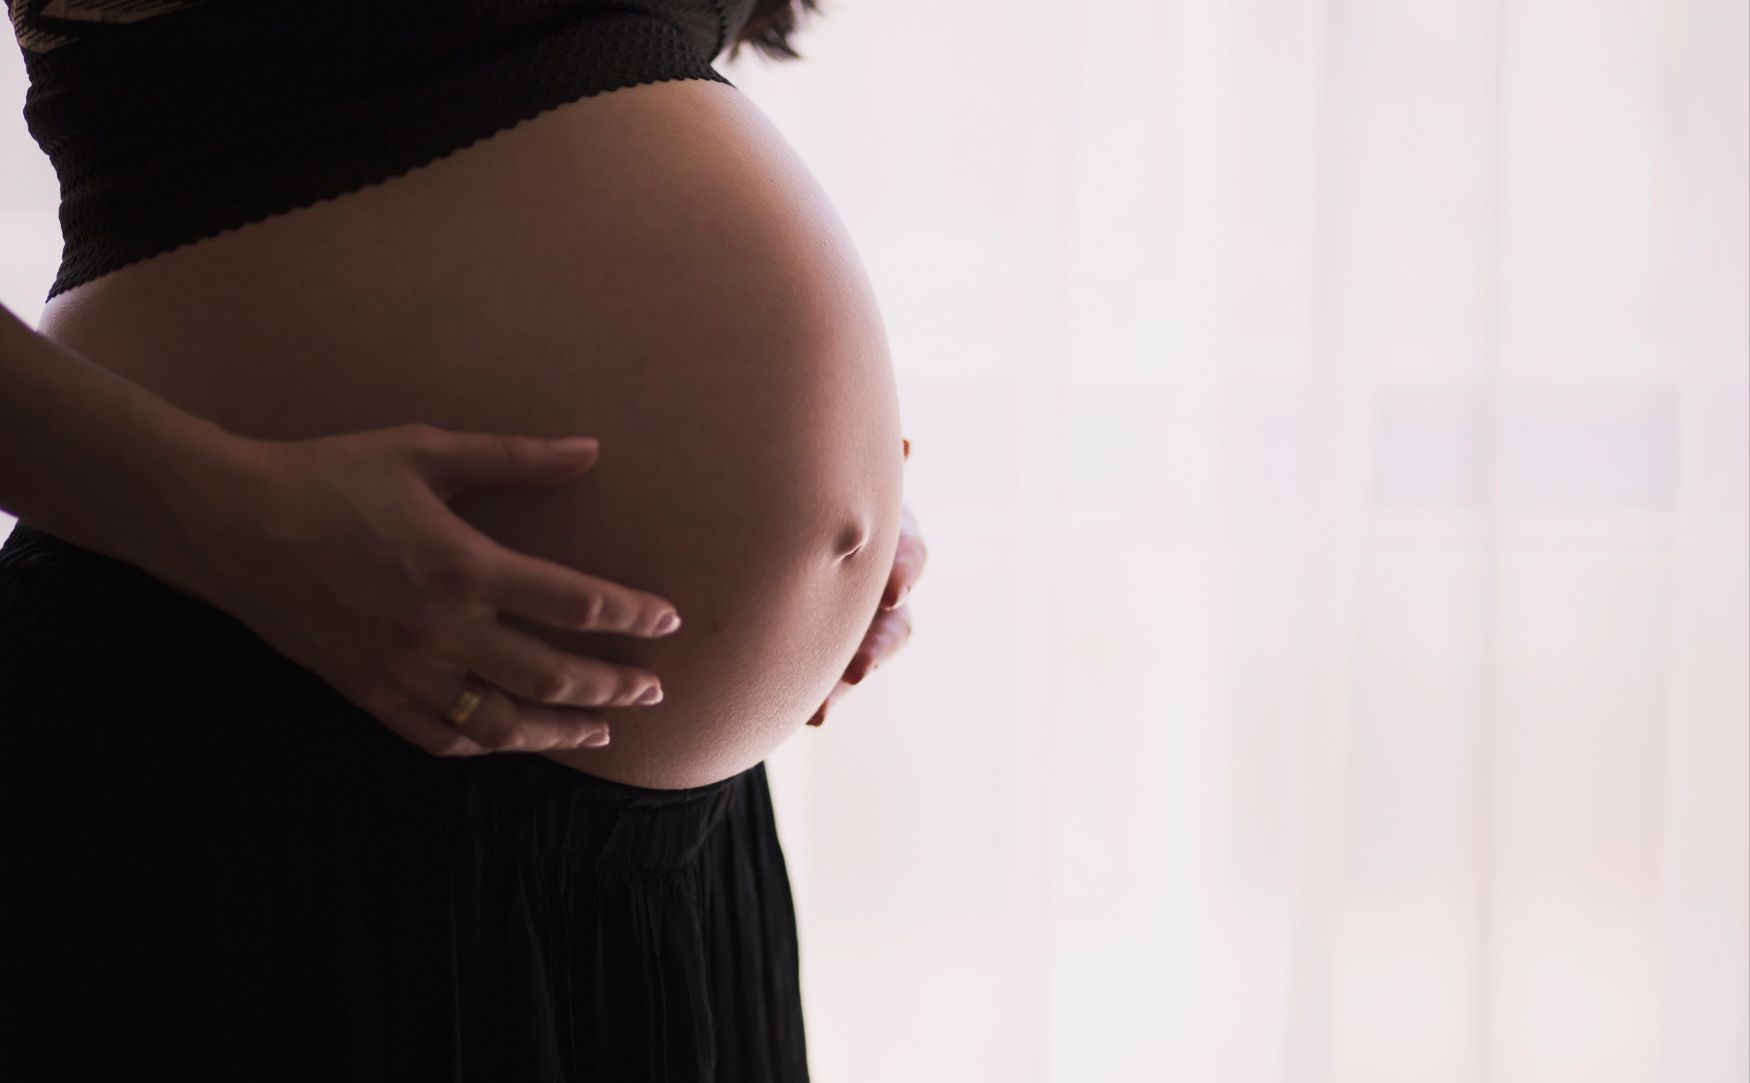 The key questions about surrogacy...